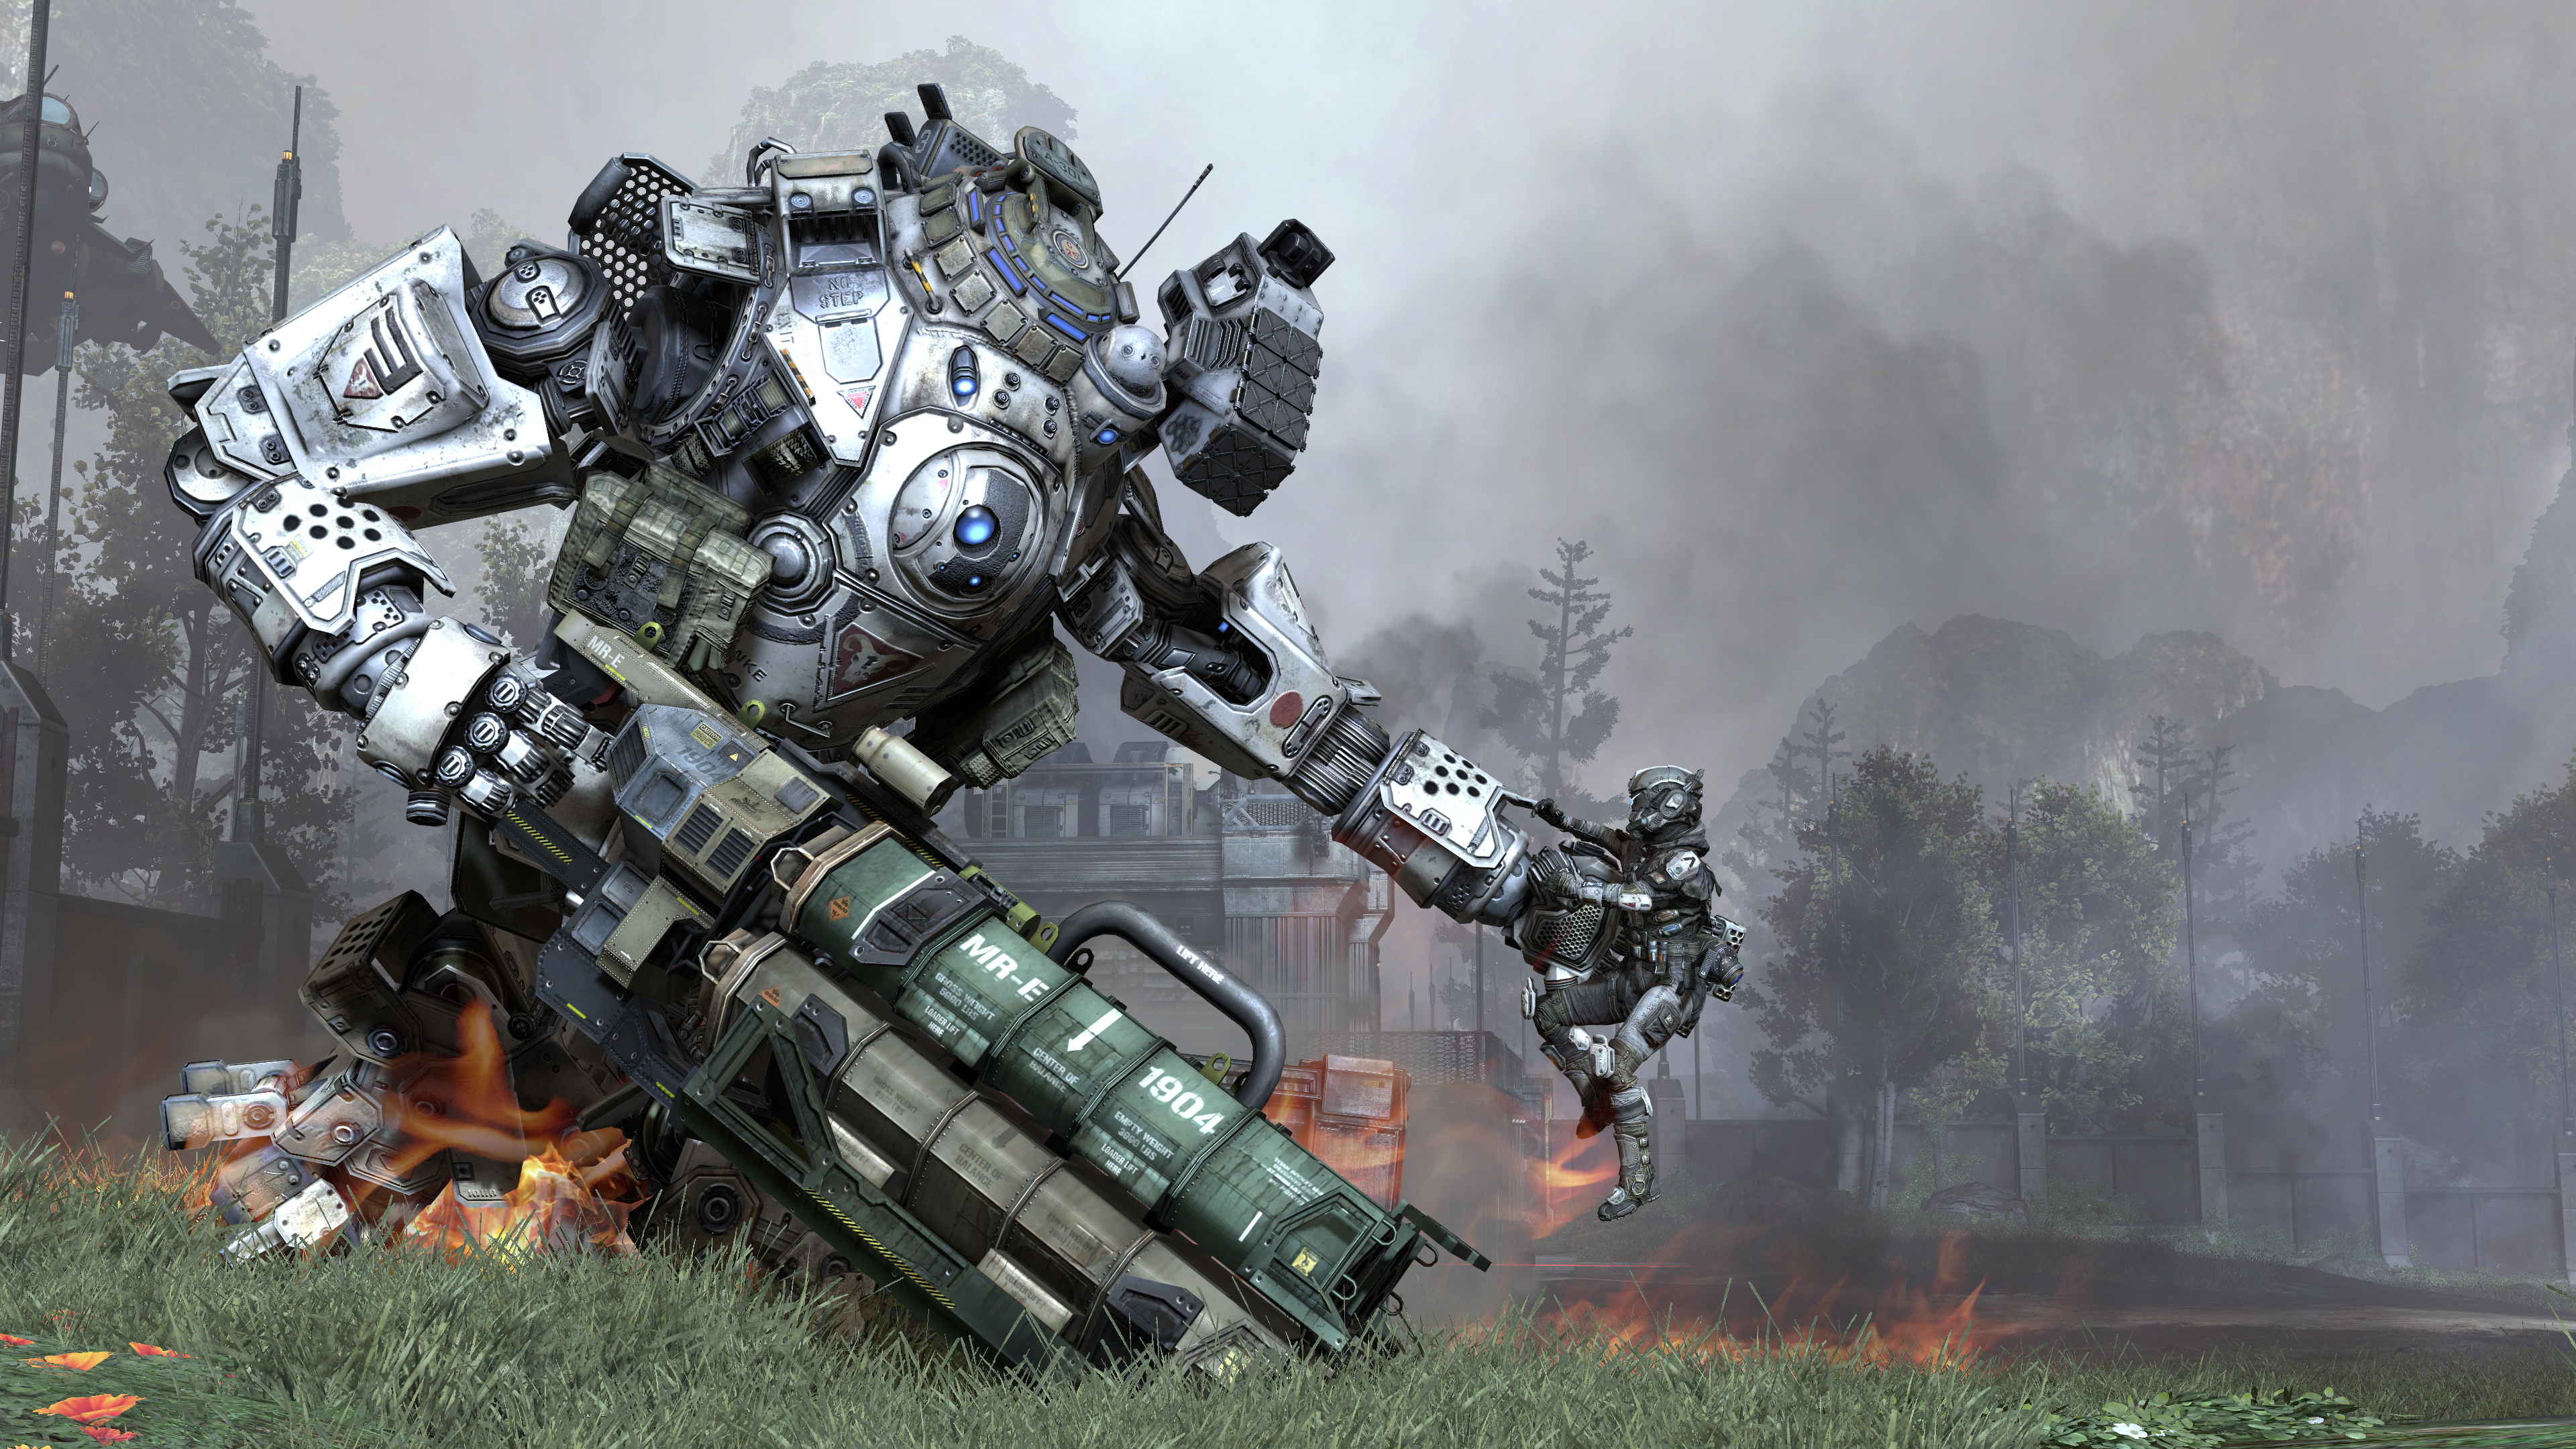 Titanfall: Expedition review